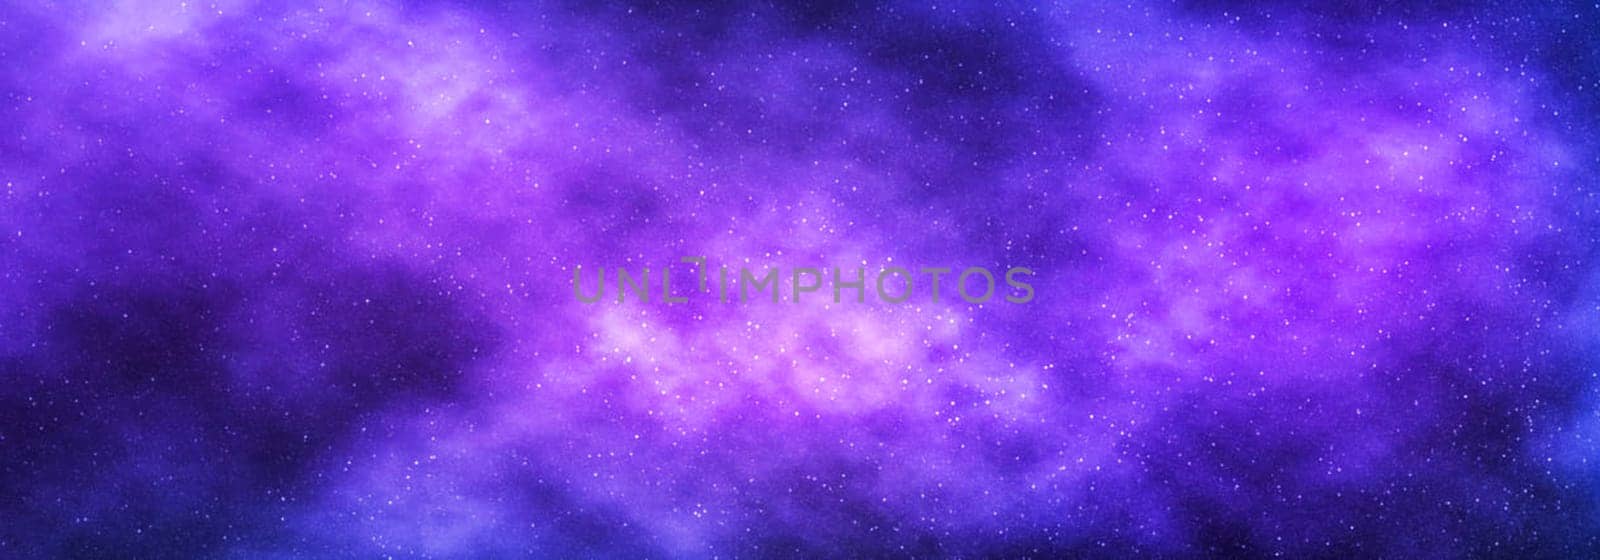 Backgrounds for wrappers, wallpapers, postcards by TravelSync27